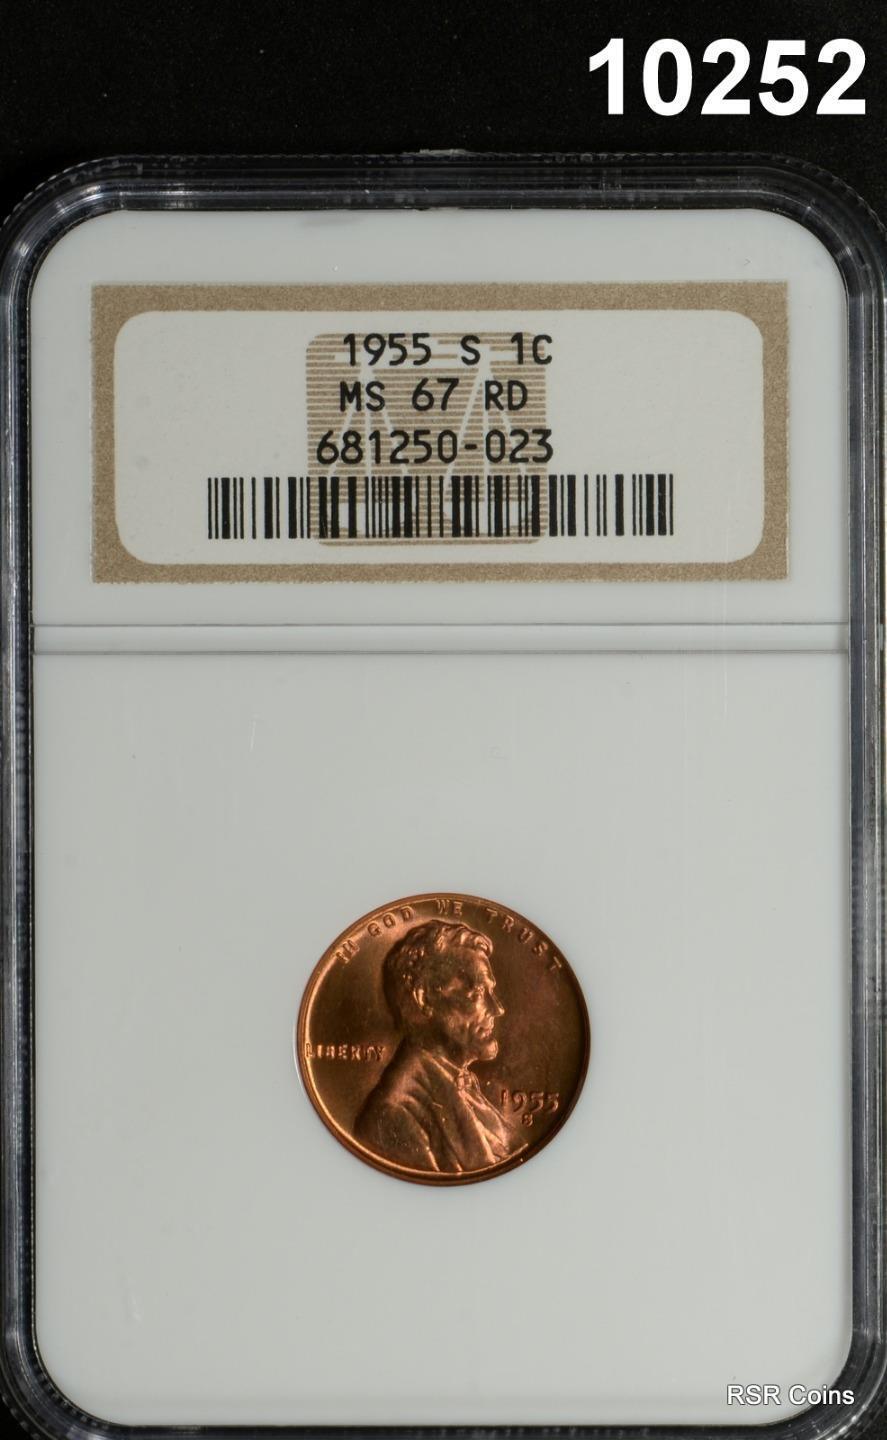 1955 S LINCOLN CENT NGC CERTIFIED MS67 RD FULL RED GEM! #10252